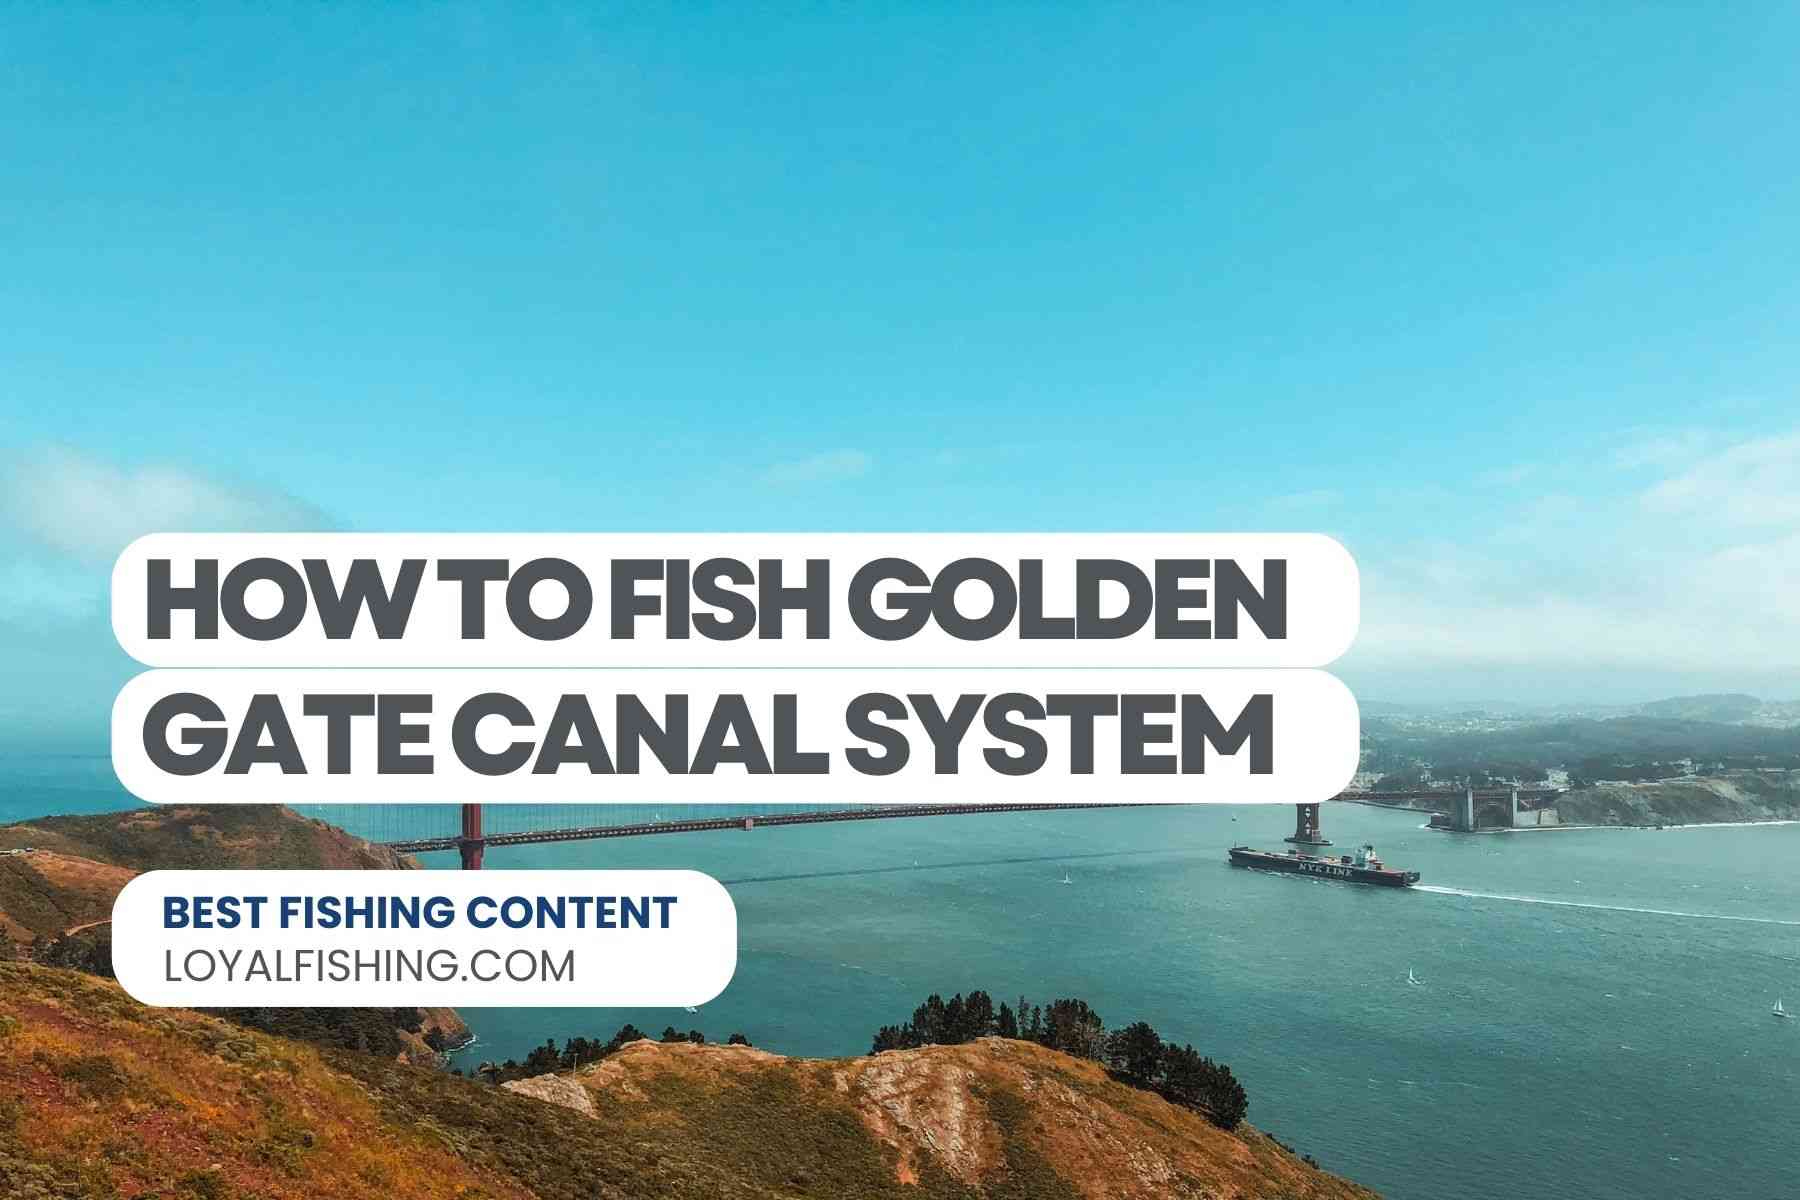 How to Fish Golden Gate Canal System